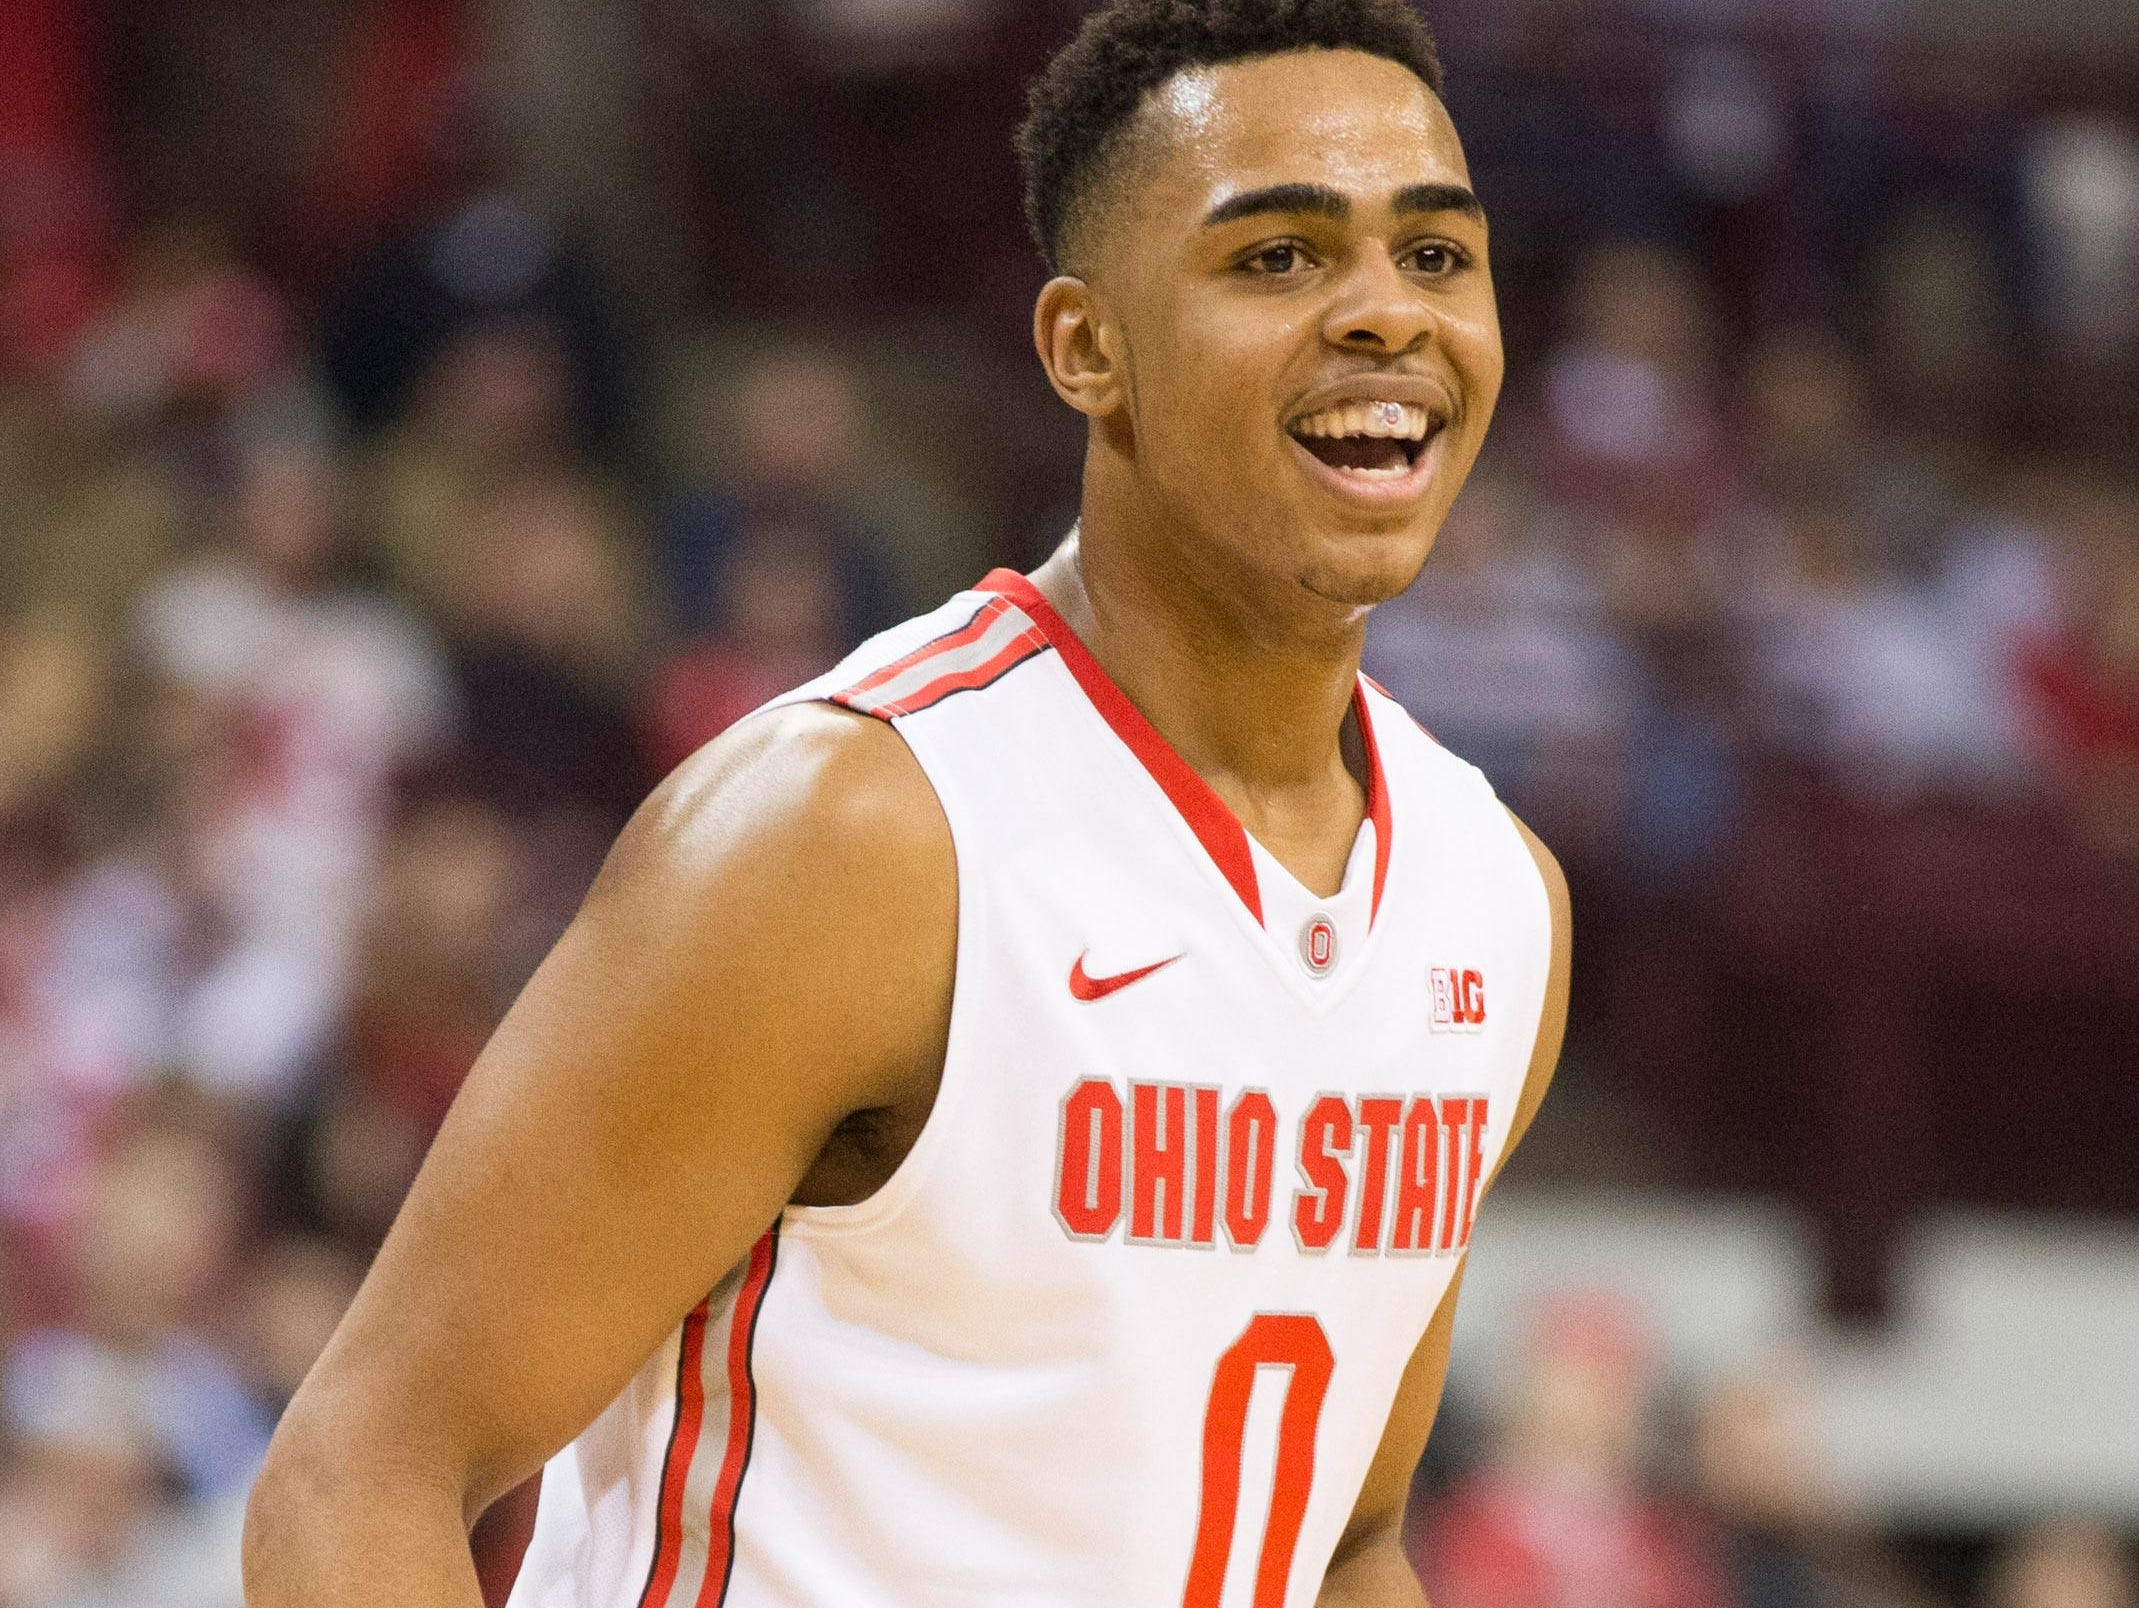 Ohio State Buckeyes guard D'Angelo Russell reacts after hitting a 3-point shot against the Marquette this past season. The Louisville native is set to become an early selection in Thursday's NBA draft.